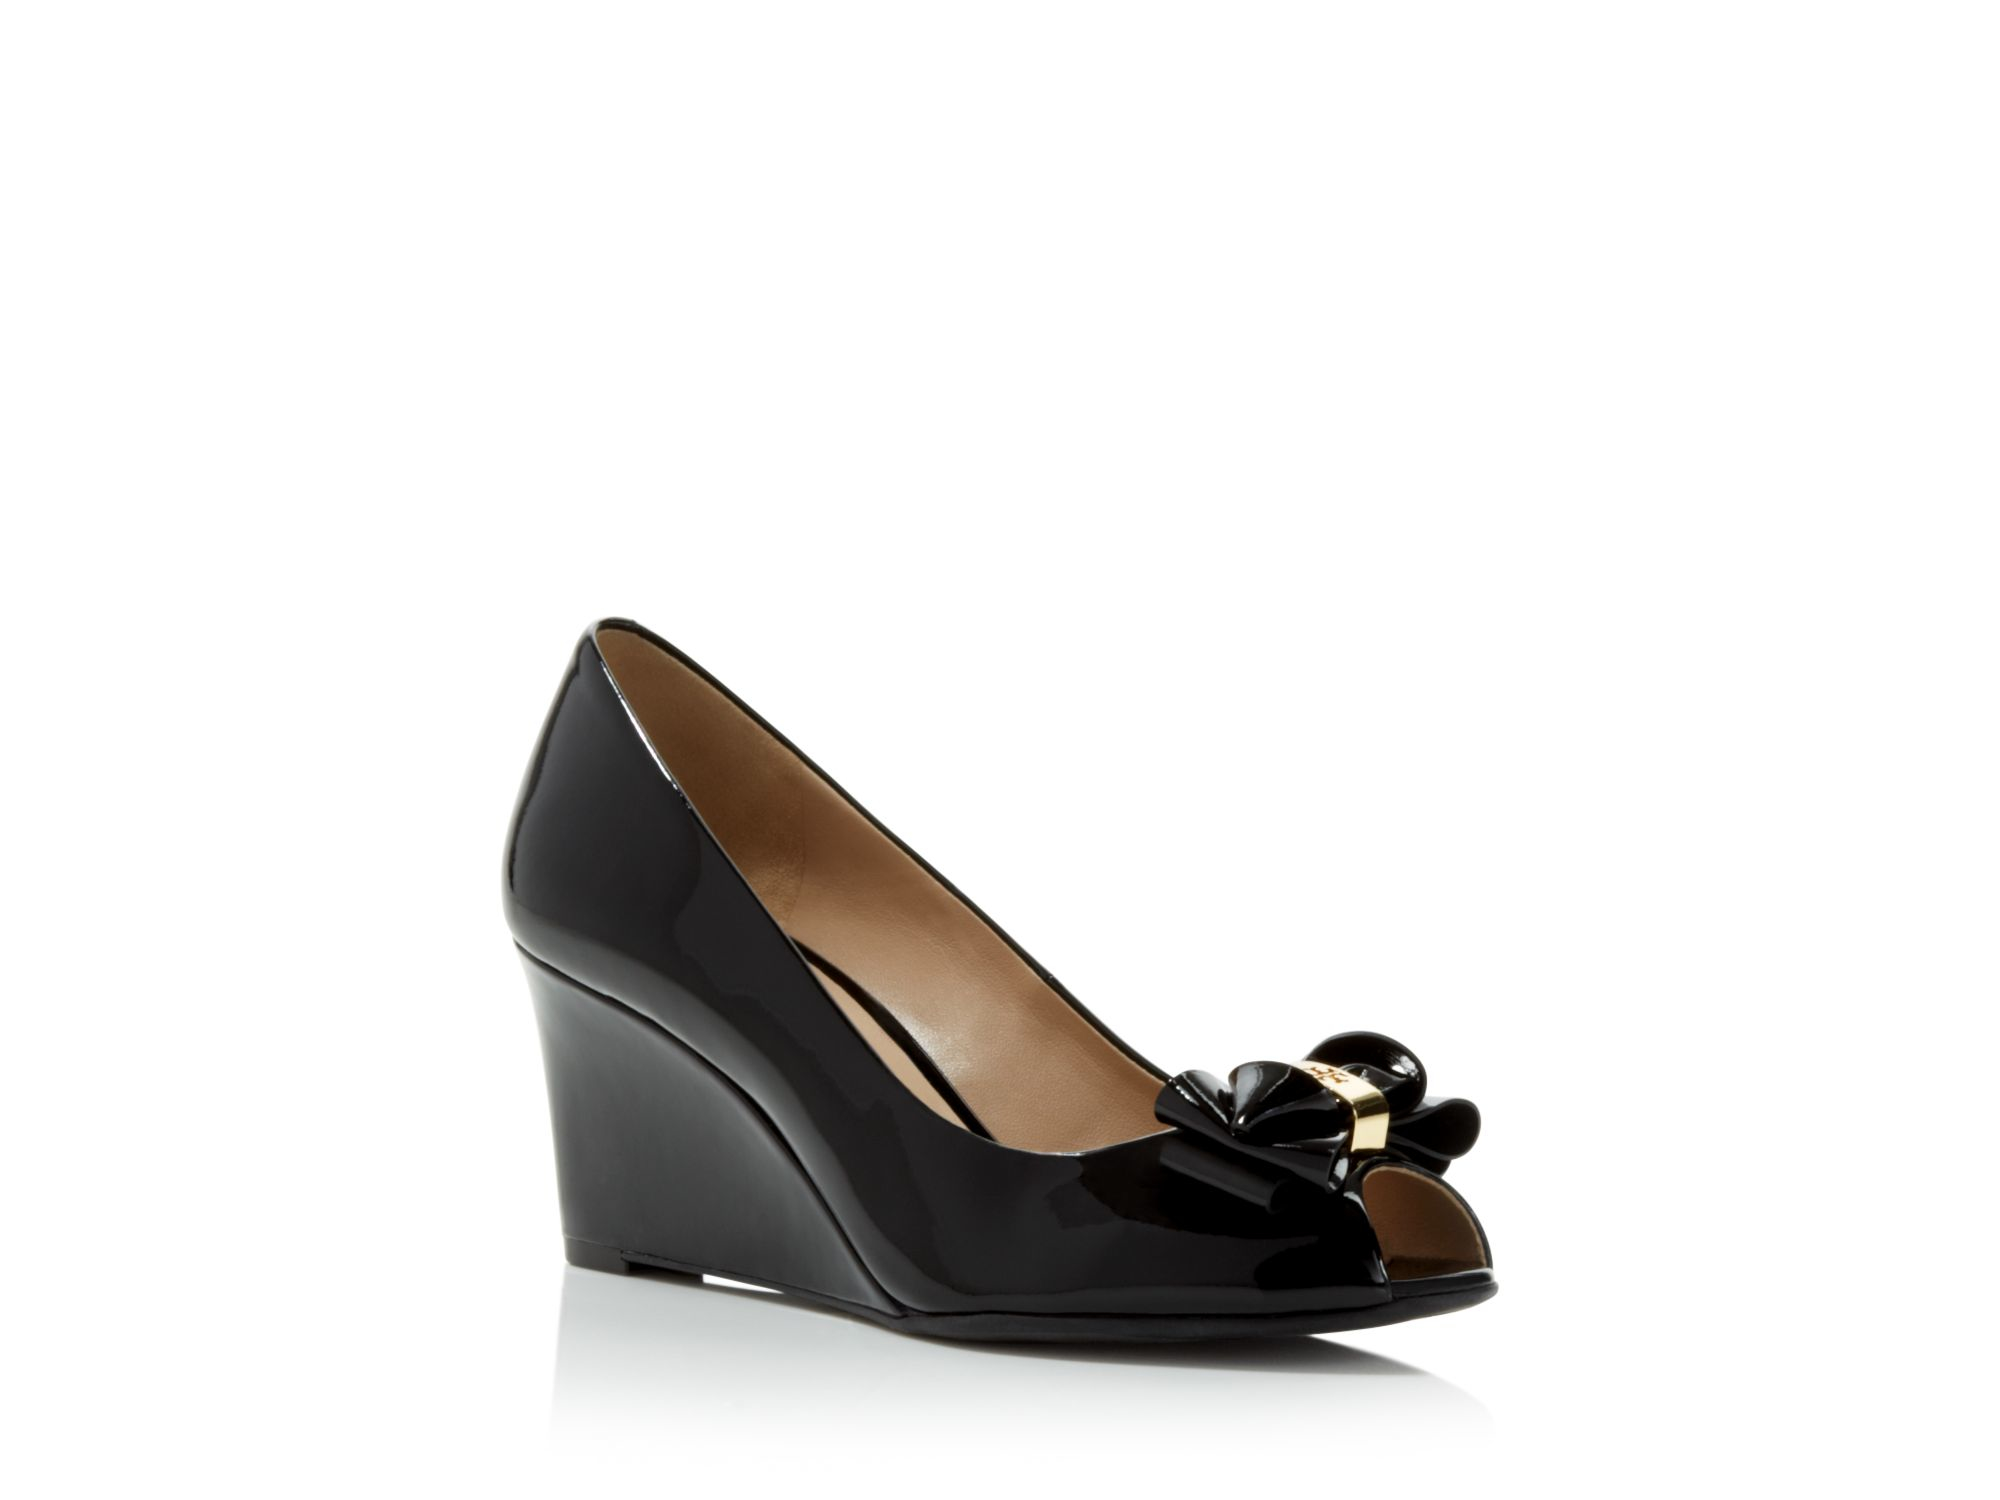 Tory Burch Stacked Bow Peep Toe Wedge Pumps in Black | Lyst